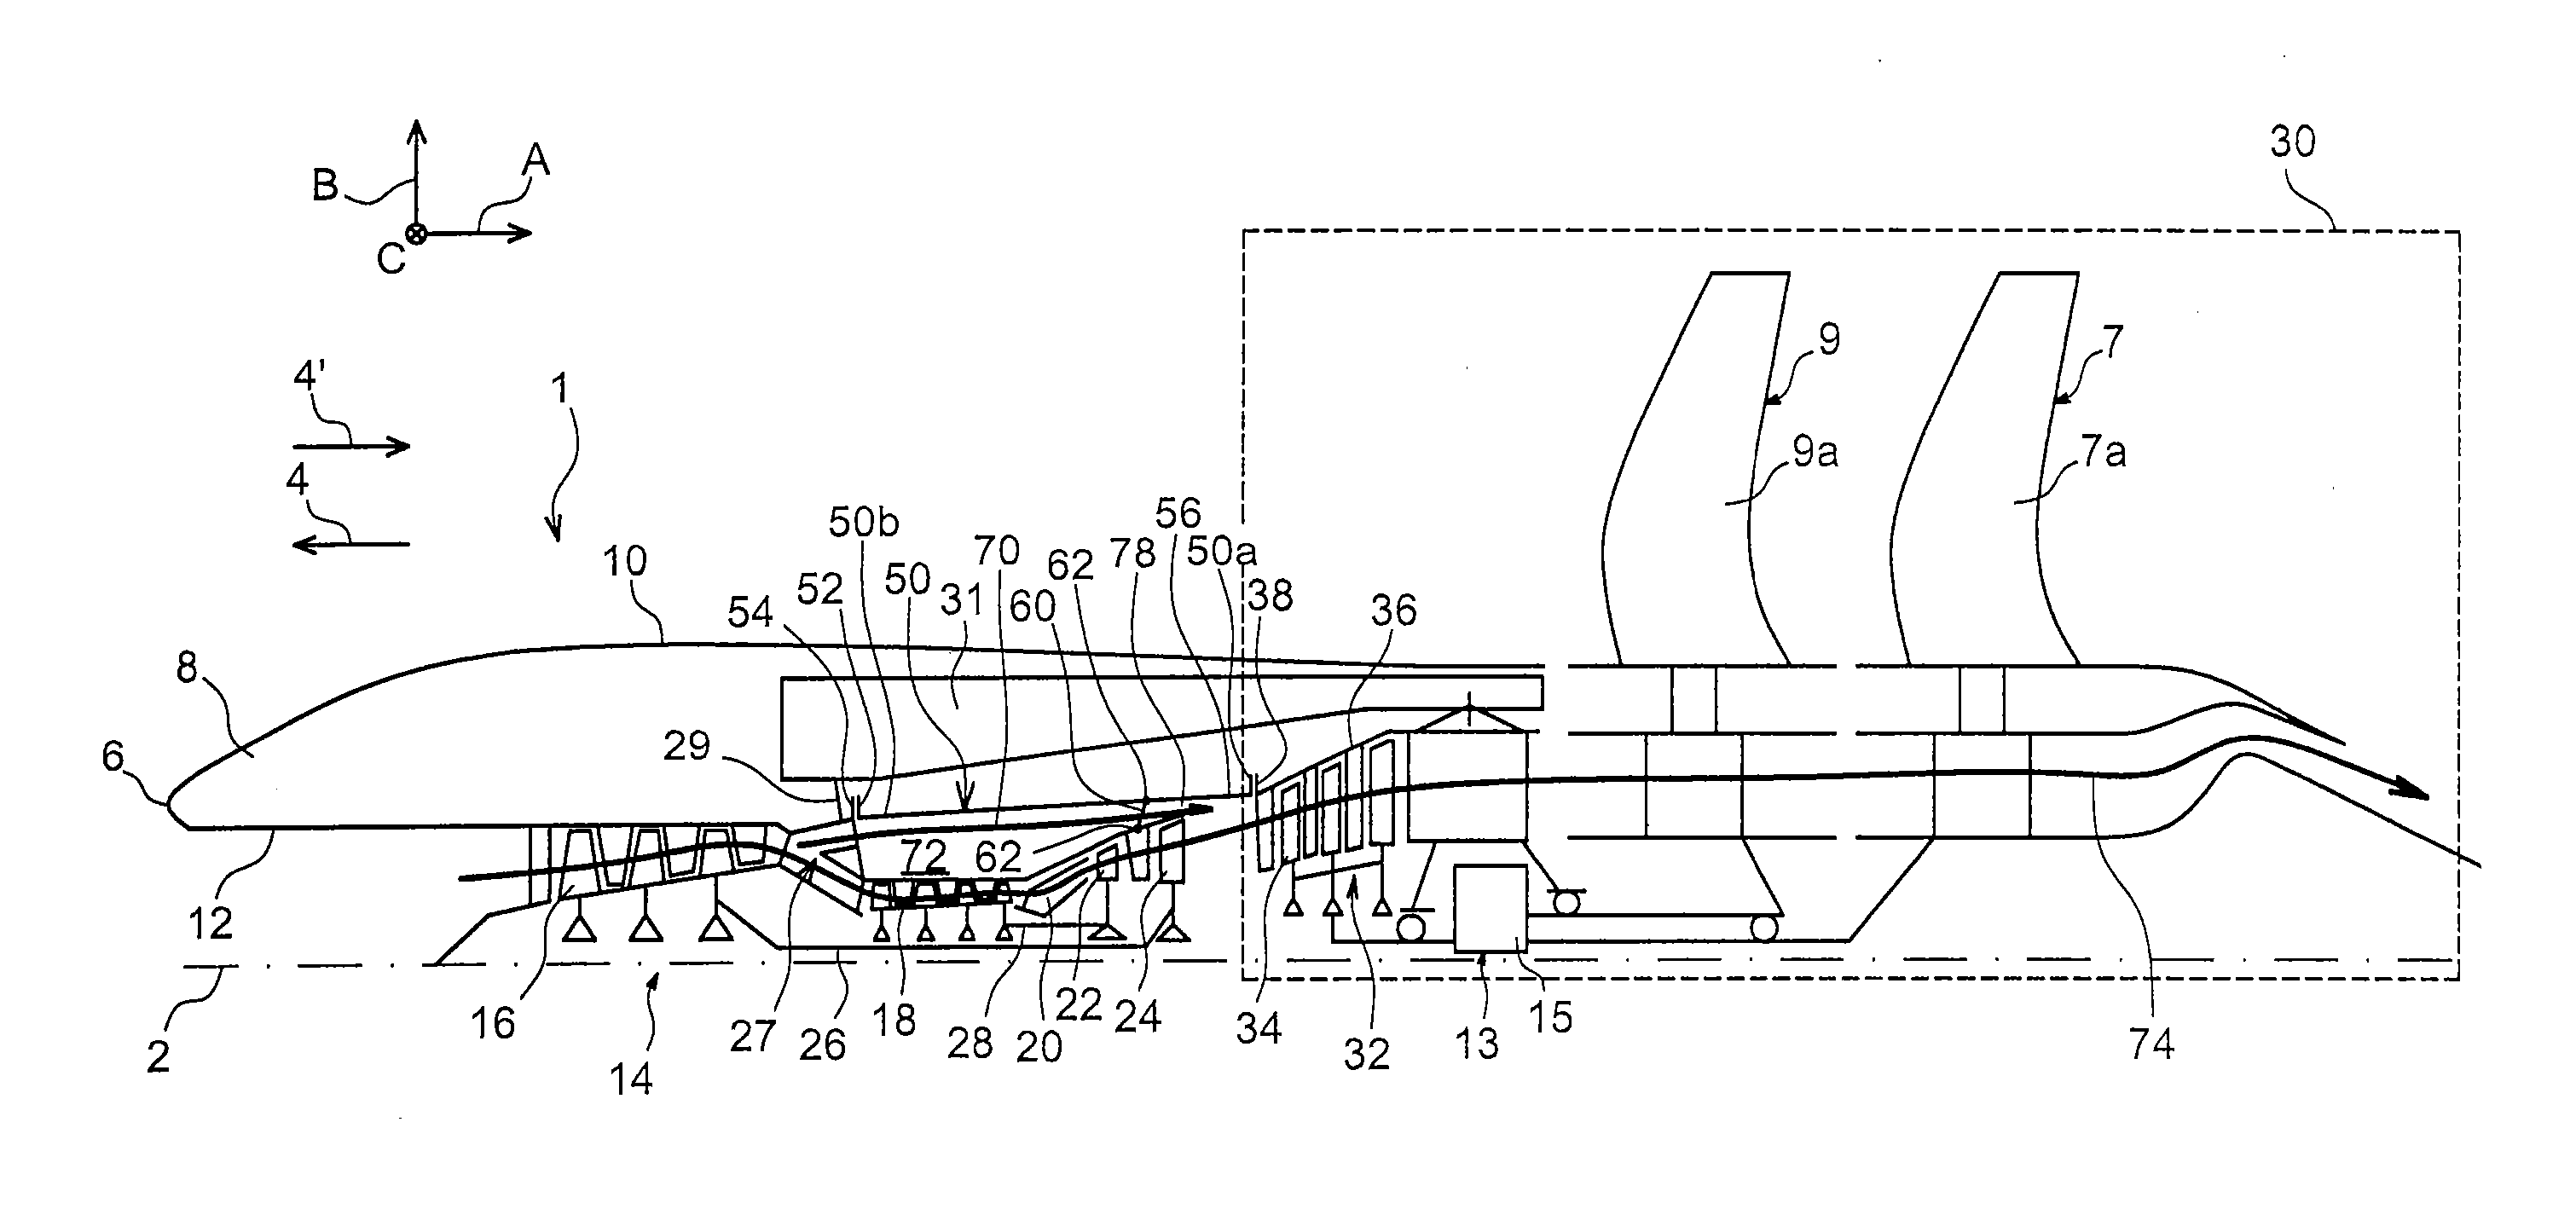 Turbine engine comprising a contrarotating propeller receiver supported by a structural casing attached to the intermediate housing